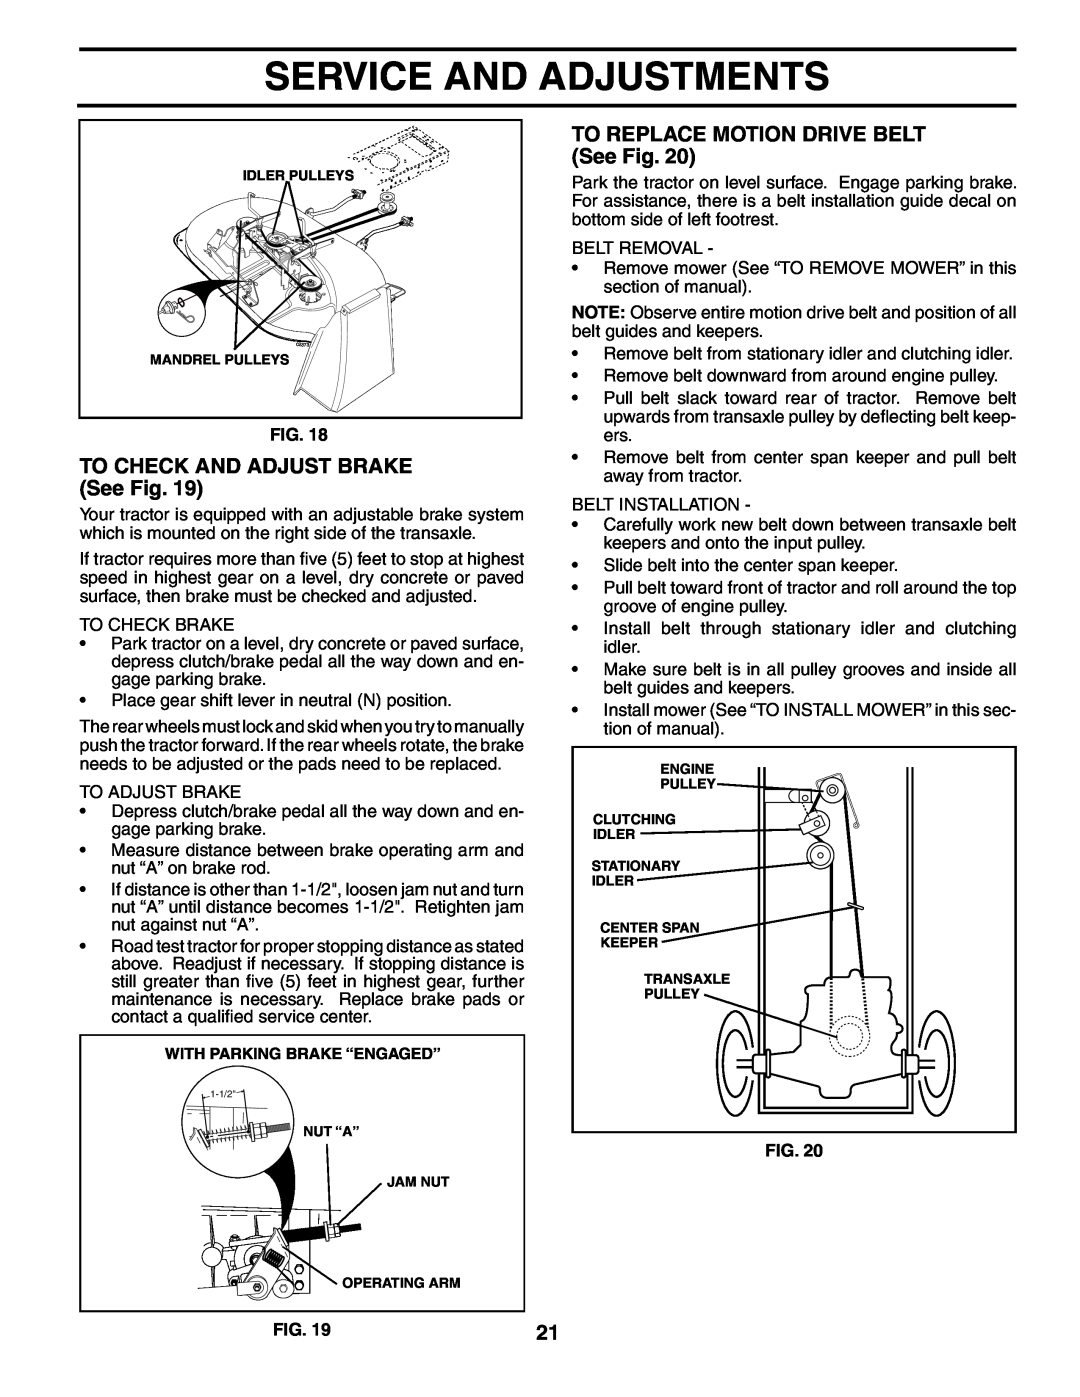 Poulan WE13538LT manual TO CHECK AND ADJUST BRAKE See Fig, TO REPLACE MOTION DRIVE BELT See Fig, Service And Adjustments 